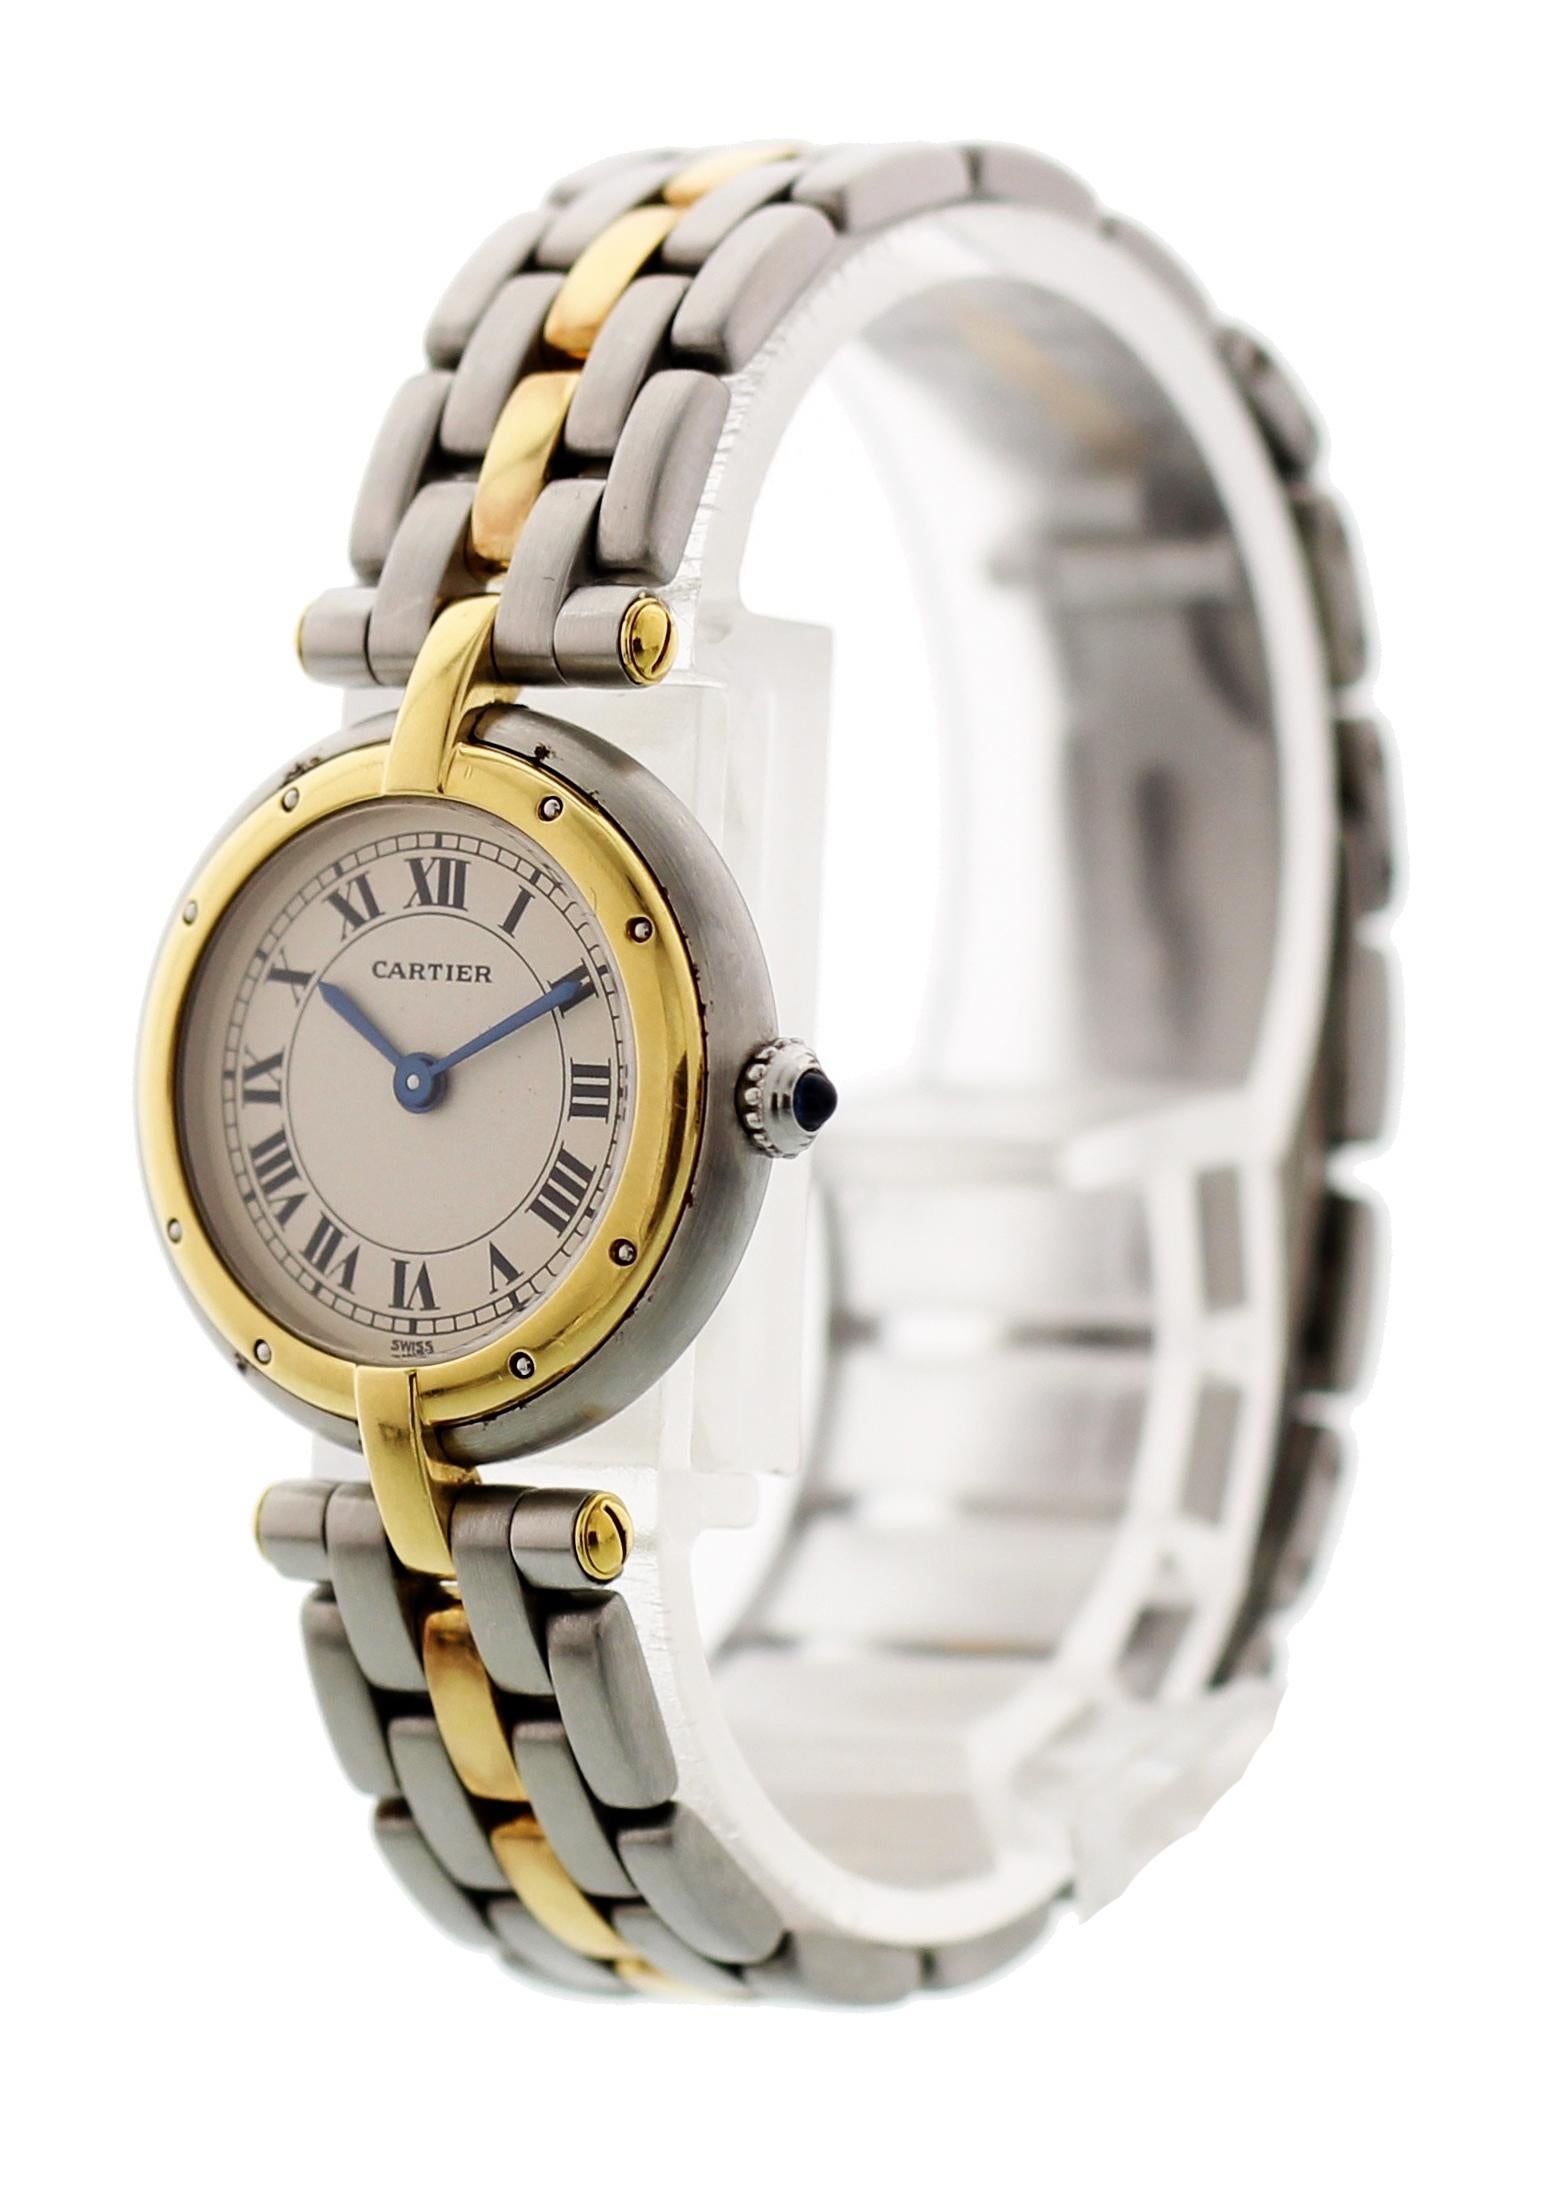 Cartier Panthere Vendome . 24 mm stainless steel case. 18K yellow gold bezel. Off-white dial with blue sapphire hands and Roman numeral markers. 18k yellow gold and stainless steel band with a stainless steel hidden butterfly clasp. Will comfortably